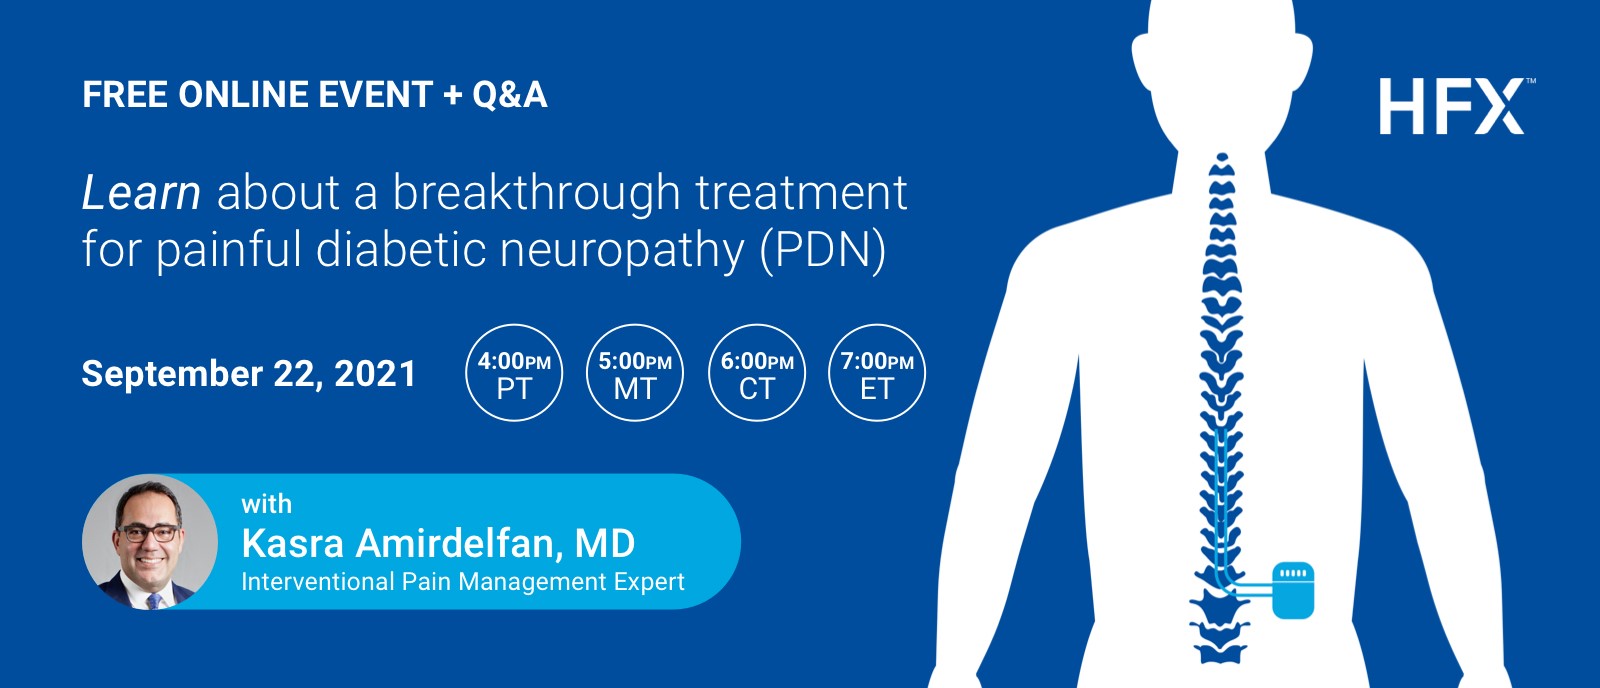 Learn about a breakthrough treatment for painful diabetic neuropathy